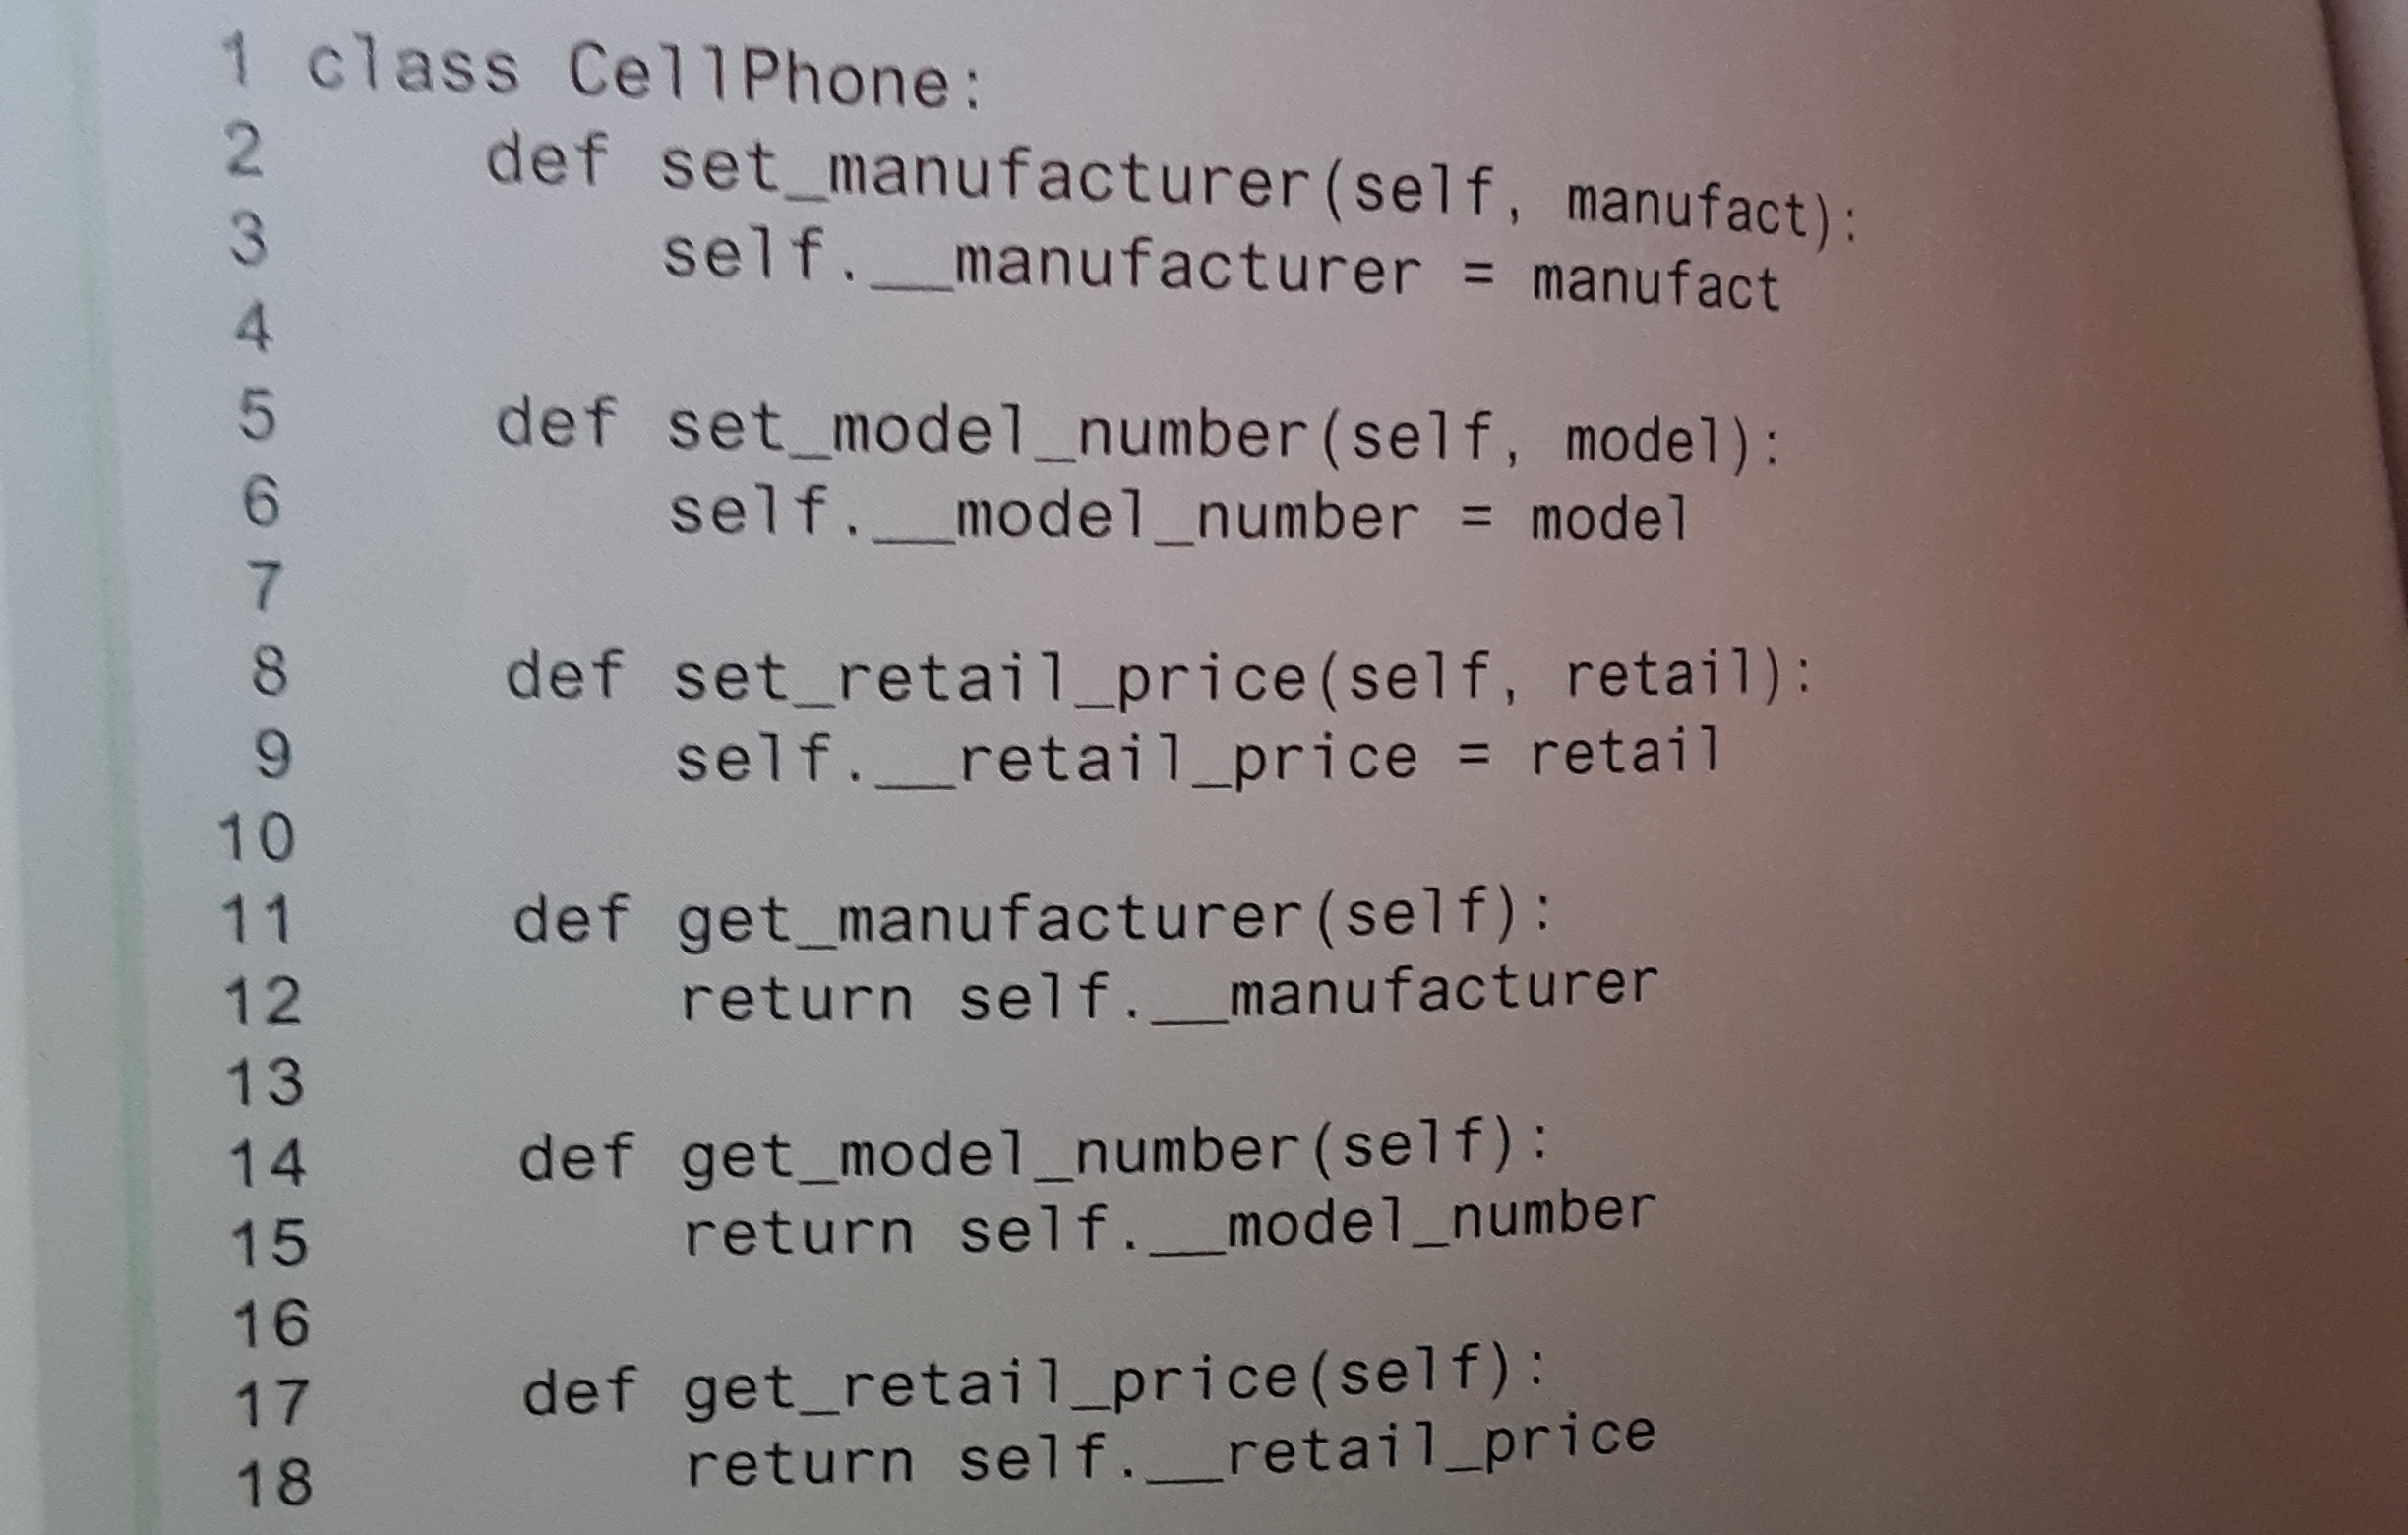 1 class Cell Phone:
2 def set_manufacturer(self, manufact):
self._manufacturer = manufact
def set_model_number (self, model):
self._model_number = model
def set_retail_price(self, retail):
self._retai1_price = retail
%3D
10
def get_manufacturer (self):
return self._manufacturer
11
12
13
def get_model_number (self):
return self._model_number
14
15
16
def get_retail_price(self):
return self._retail_price
17
18
234567890
